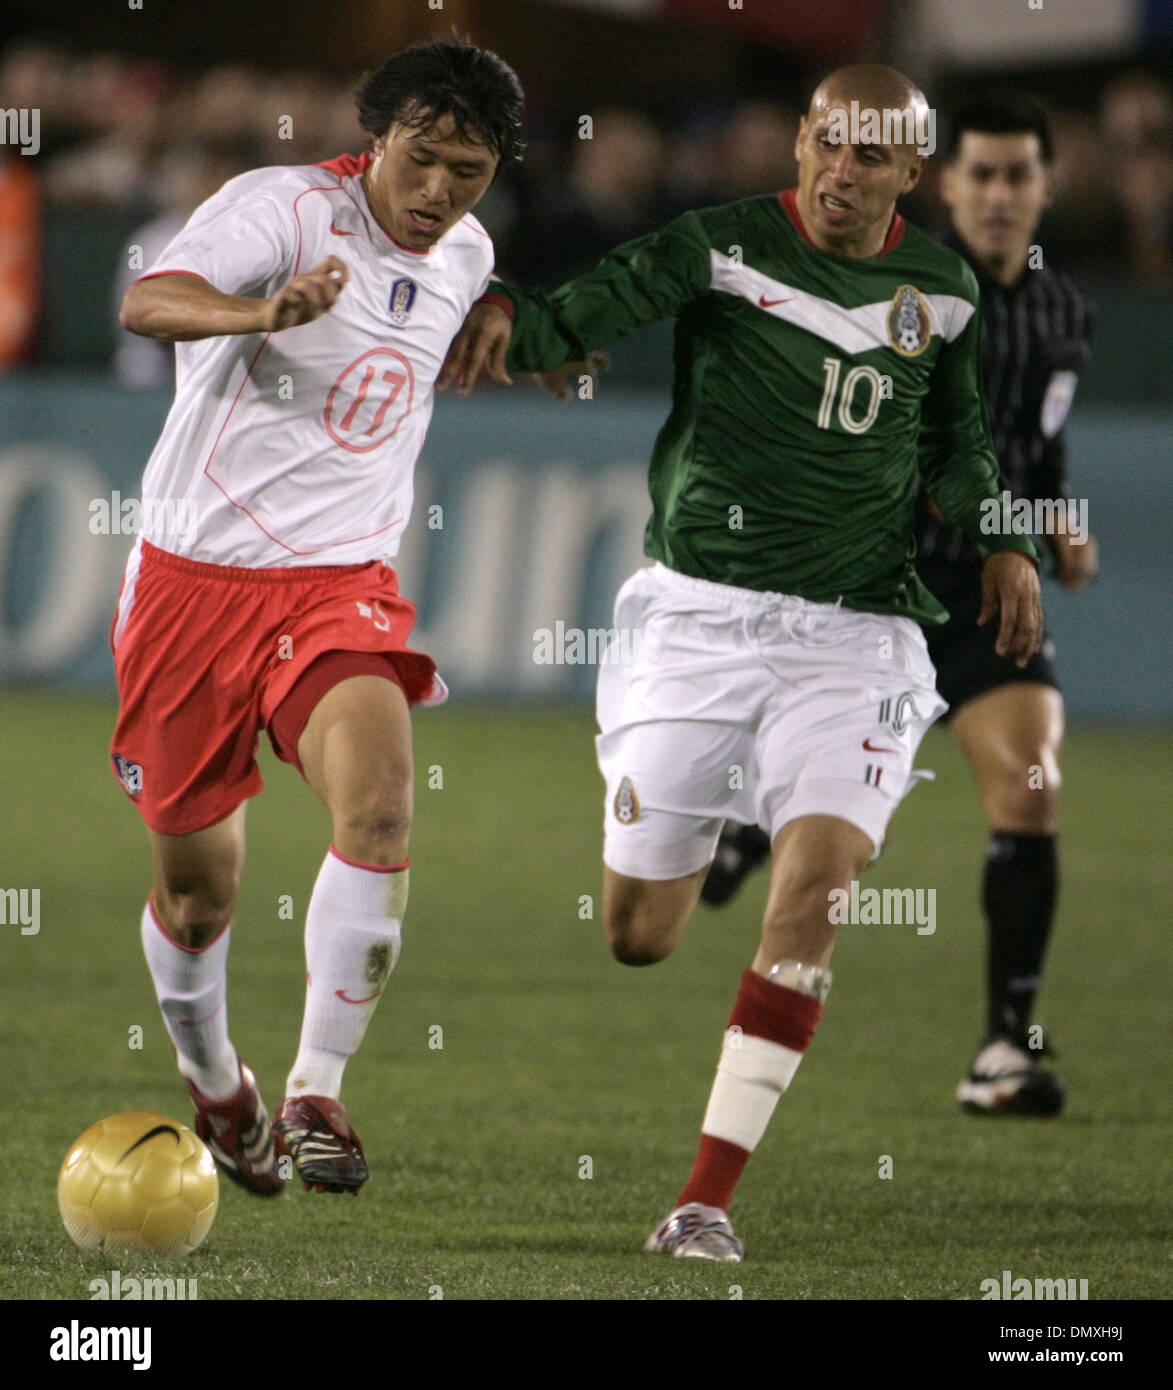 Feb 15, 2006; Los Angeles, CA, USA; SOCCER: (10) Adolfo Bautista from the National Team of Mexico  fights for the ball against (17) Ho Lee from the national team of Korea Republic during their tune up match prior to the world cup at the Los Angeles Memorial Coliseum Wednesday 15 February 2006. Korea won the game 1-0. Mandatory Credit: Photo by Armando Arorizo/ZUMA Press. (©) Copyri Stock Photo